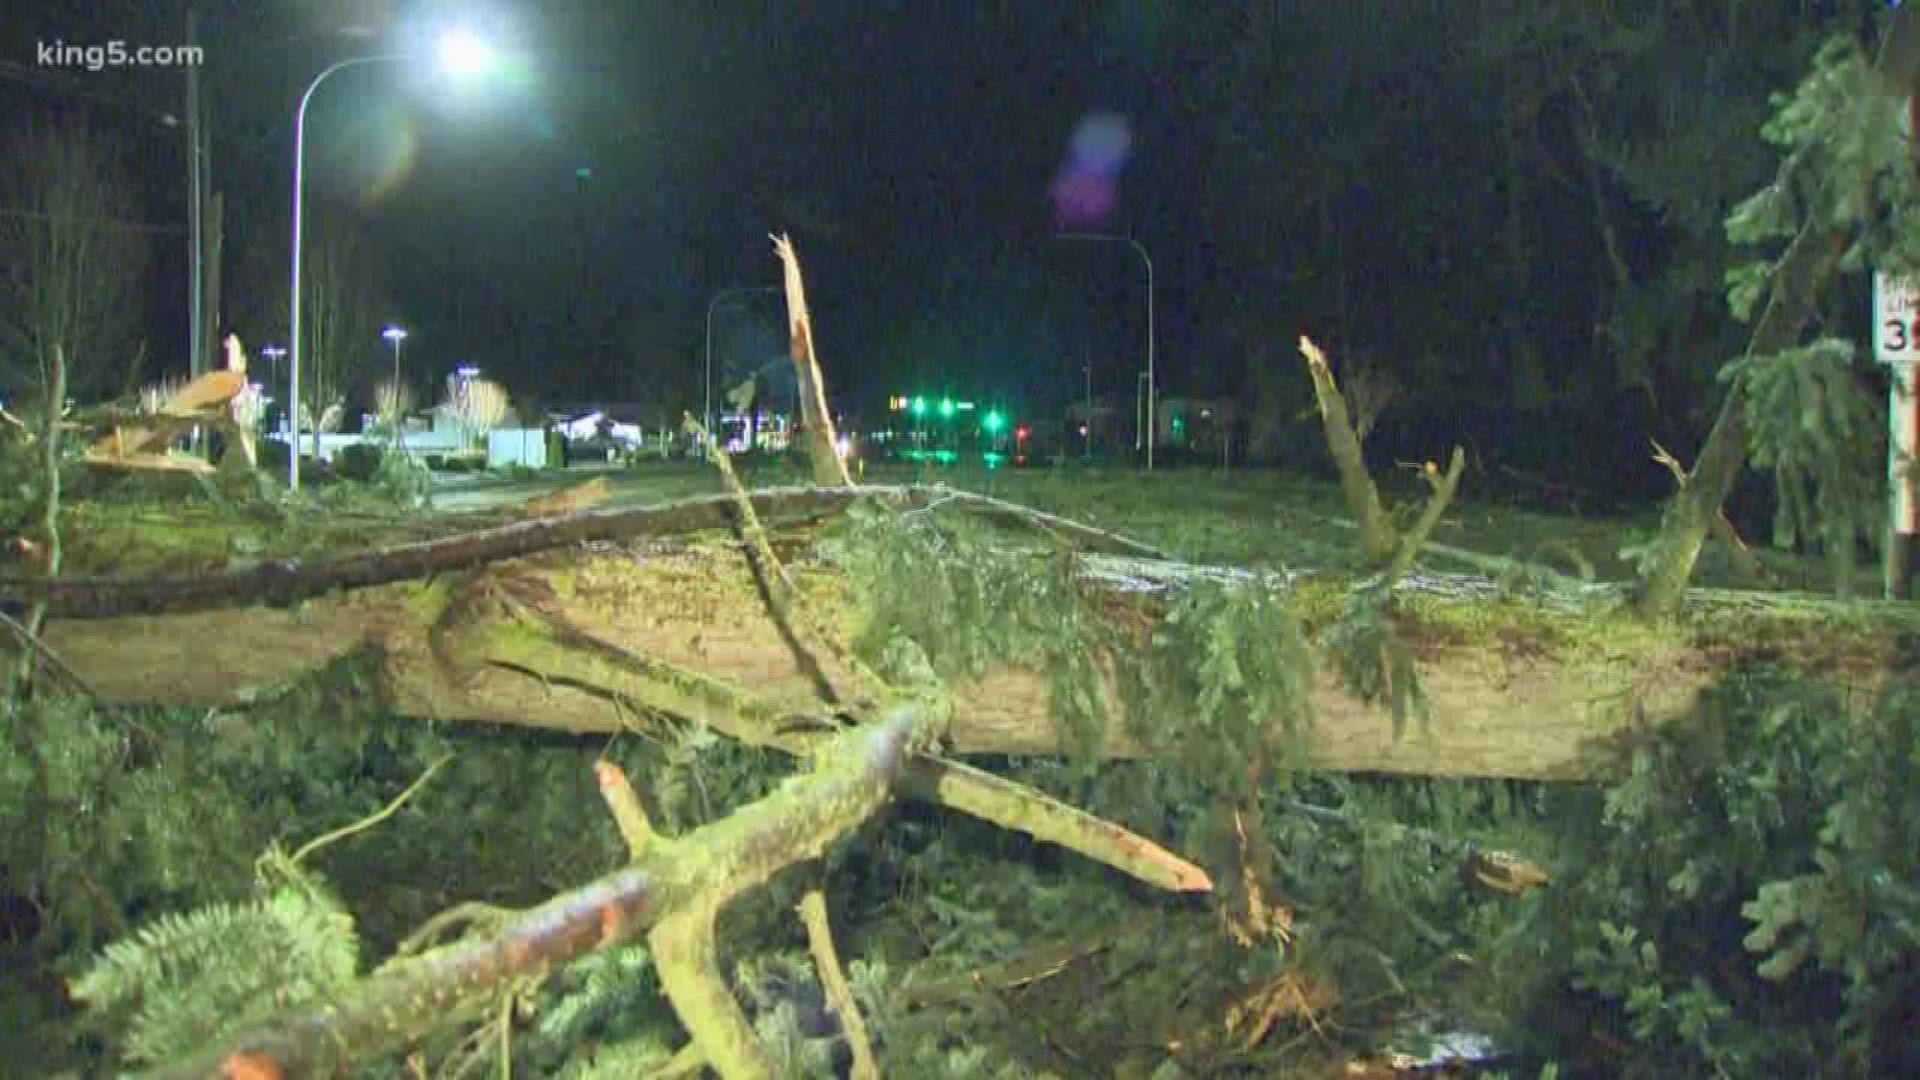 Here's a look at damage from the early Sunday windstorm in Western Washington